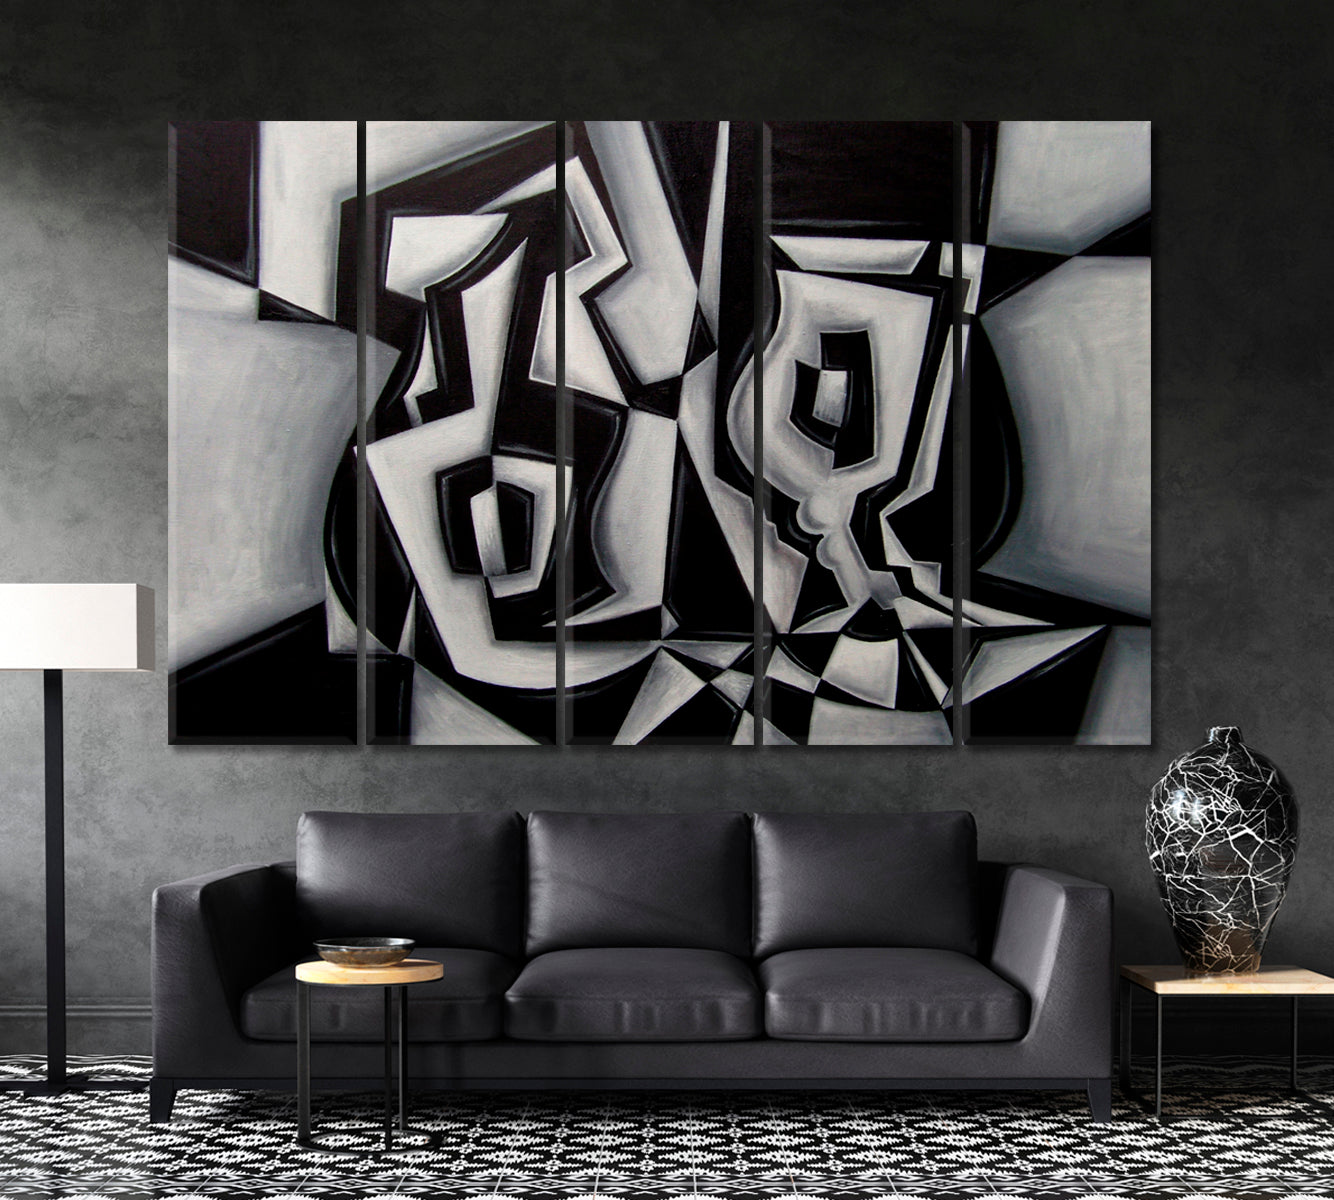 Cubism Style Abstract Black White Glass Bottle Cubist Trendy Large Art Print Artesty 5 panels 36" x 24" 